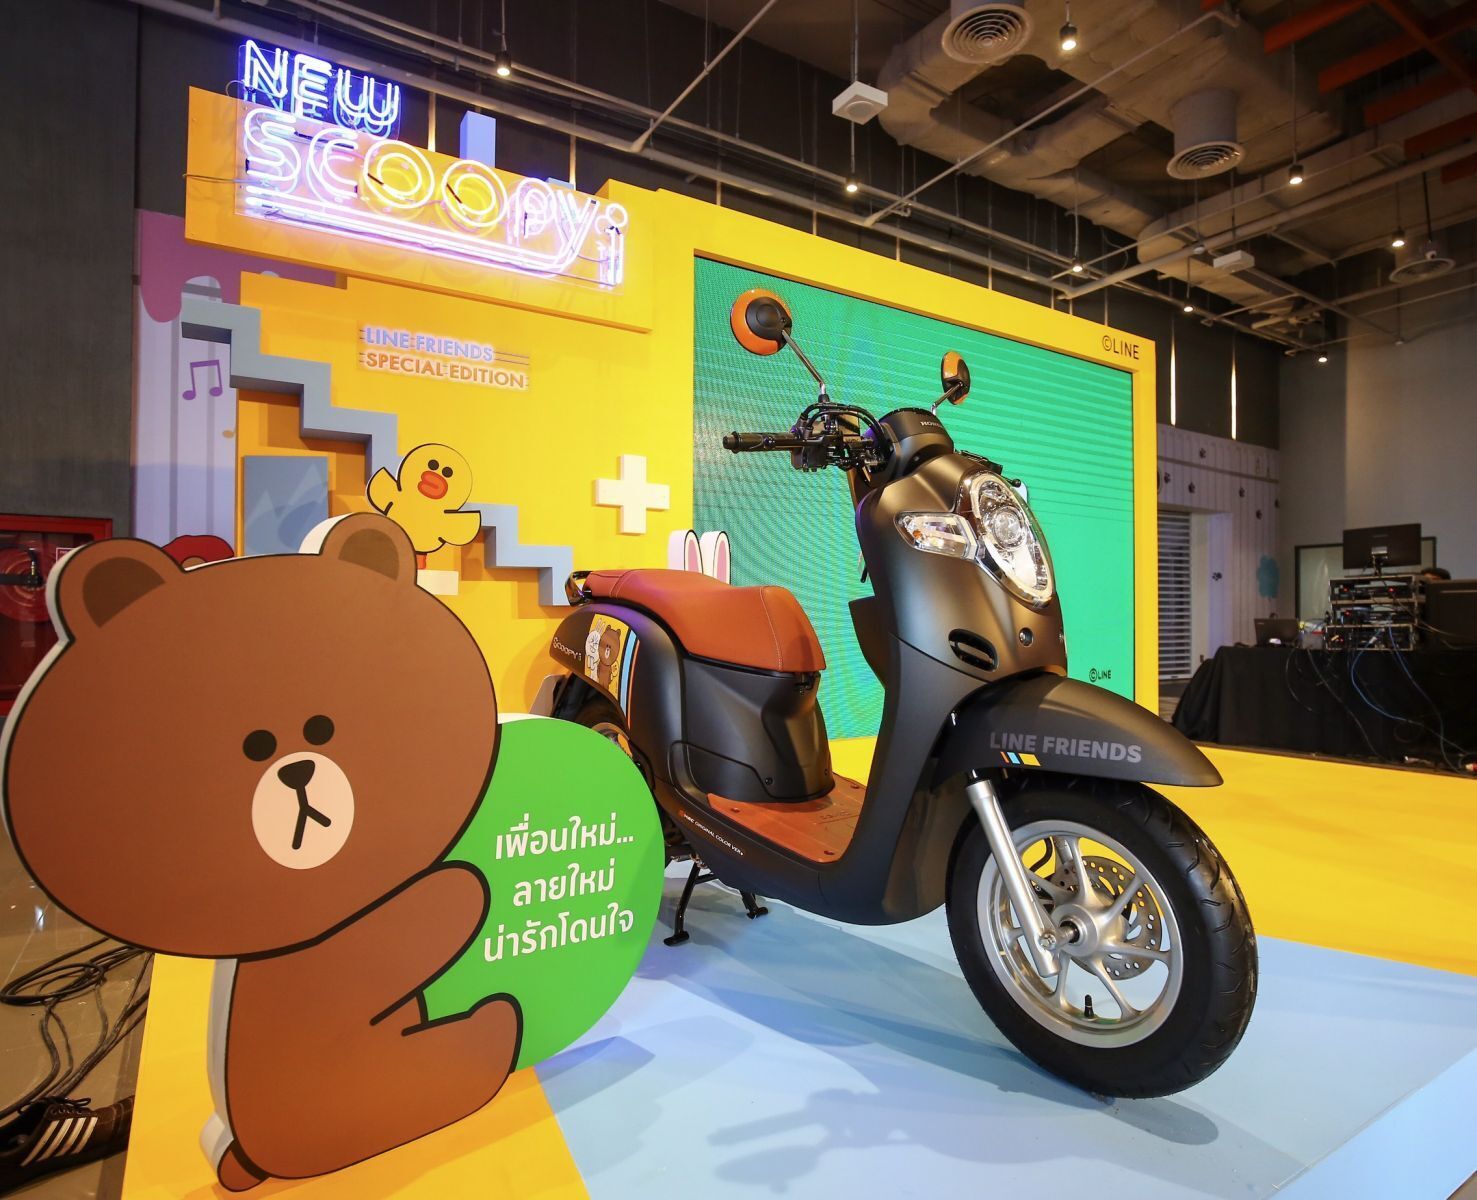 Honda Scoopy i LINE FRIENDS Special Edition